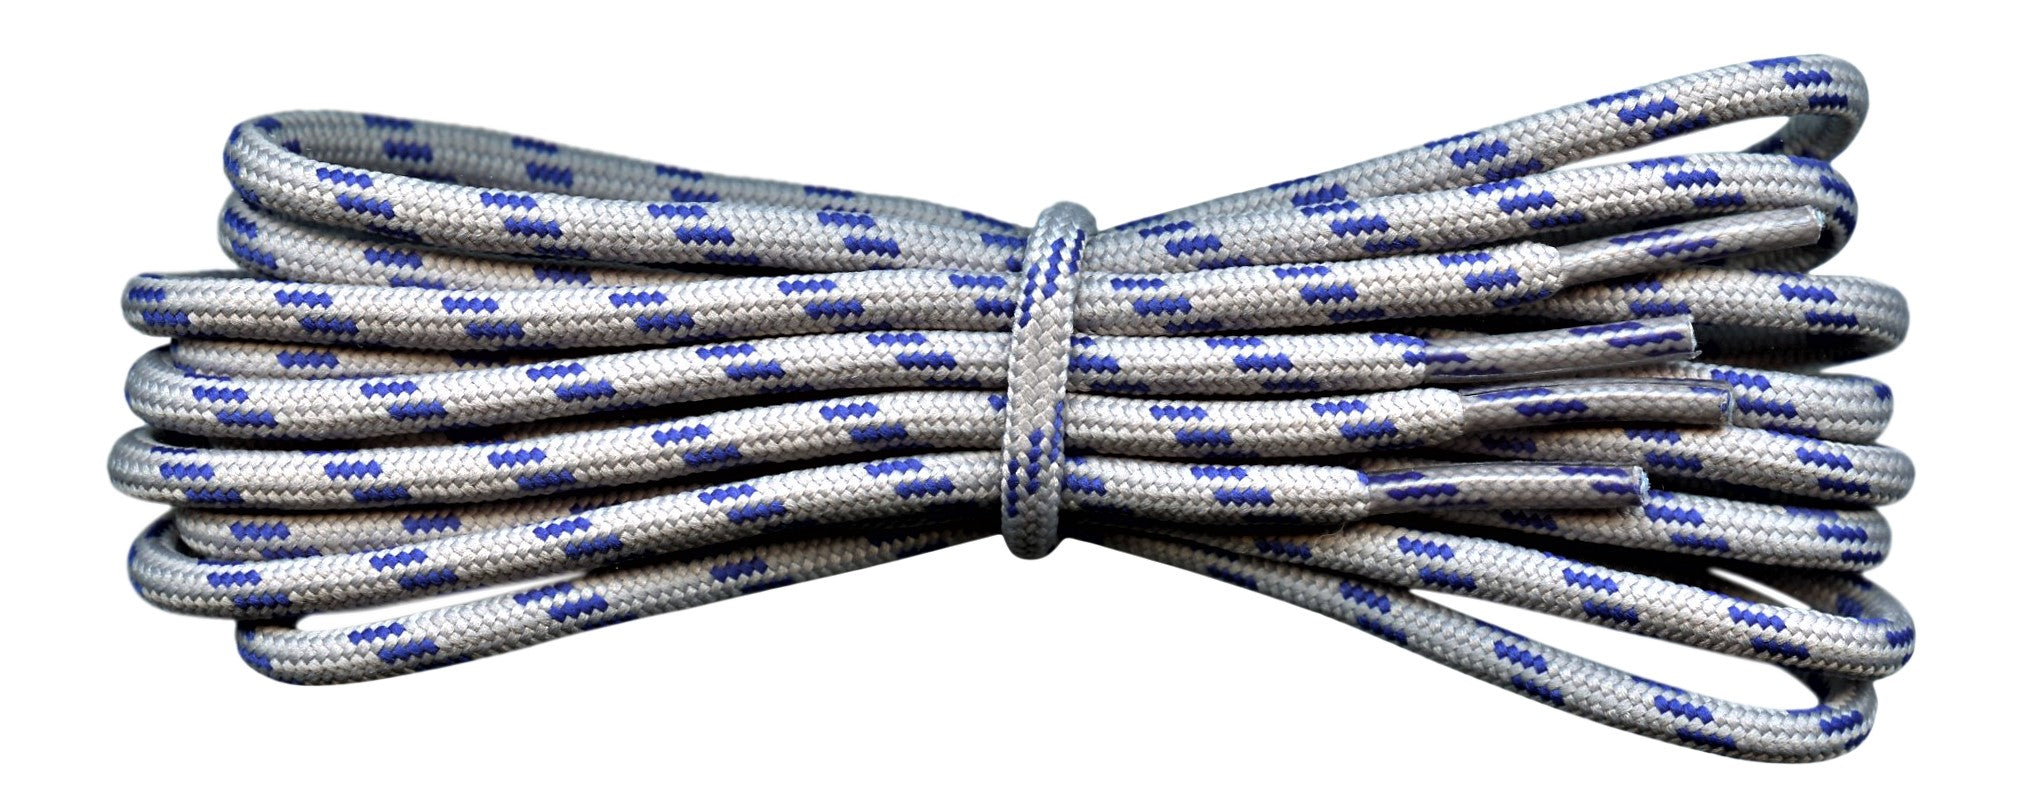 Strong Round Boot Laces Grey with Royal Blue flecks for hiking or walking  3.5 mm - fabmania shoe laces